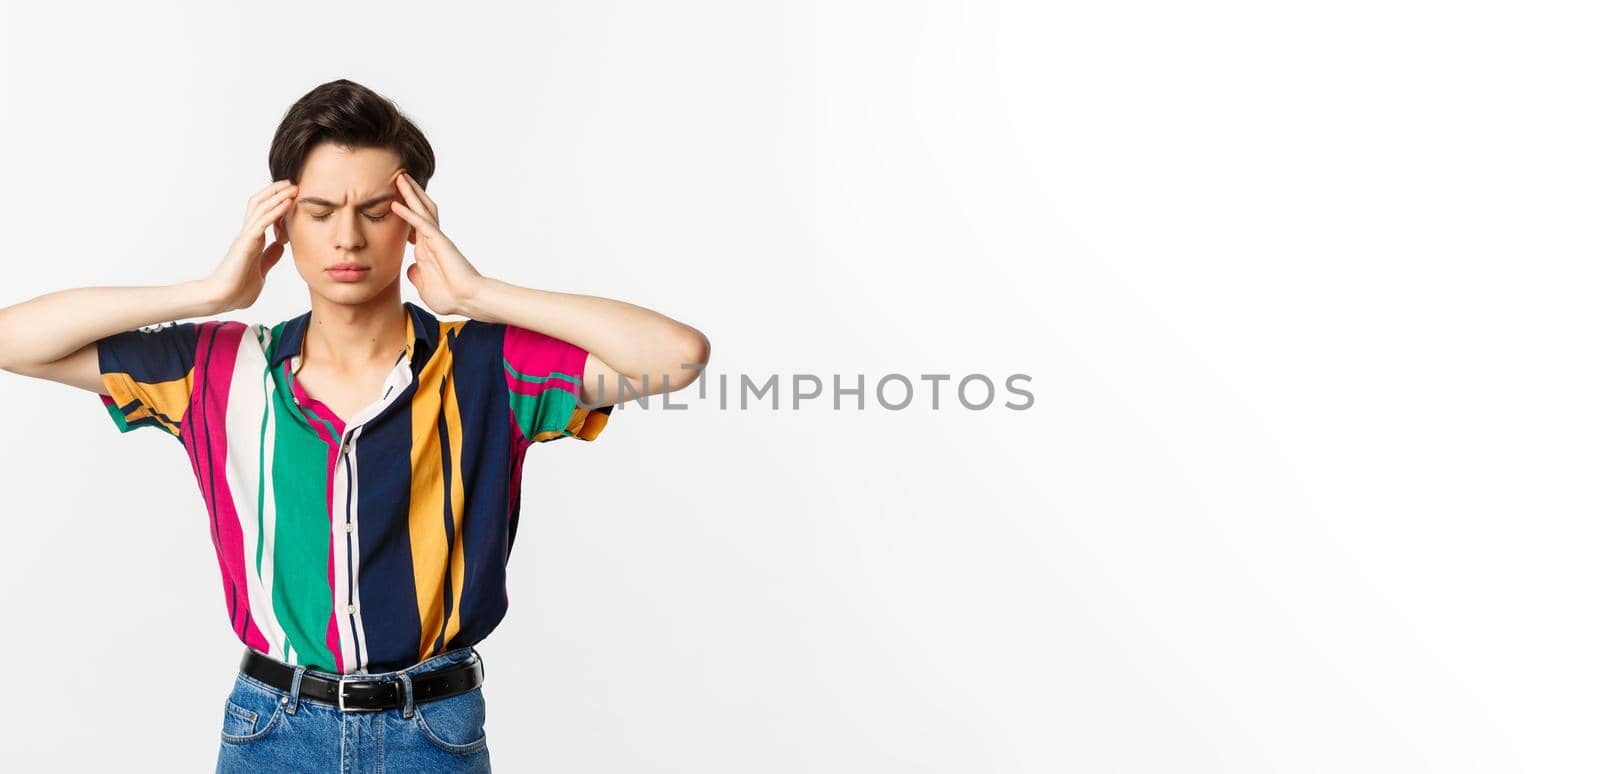 Image of young man having headache, looking troubled, holding hands on head, standing over white background.